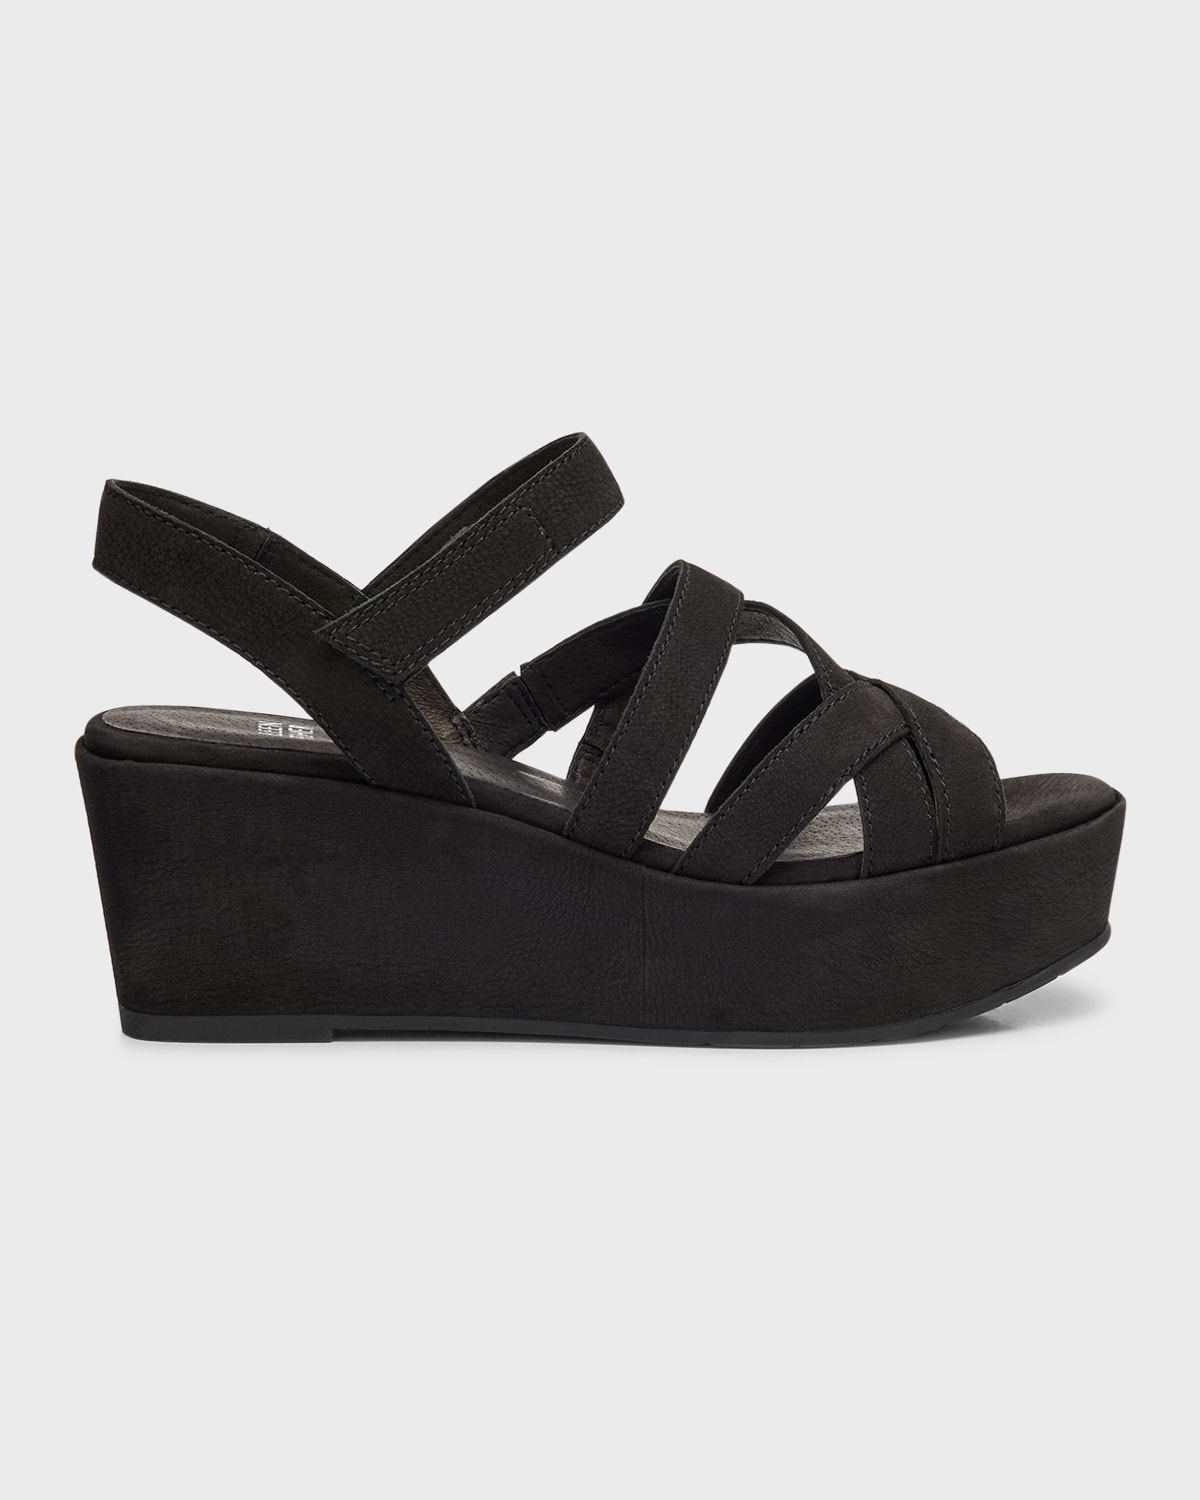 Mazy Suede Strappy Wedge Sandals